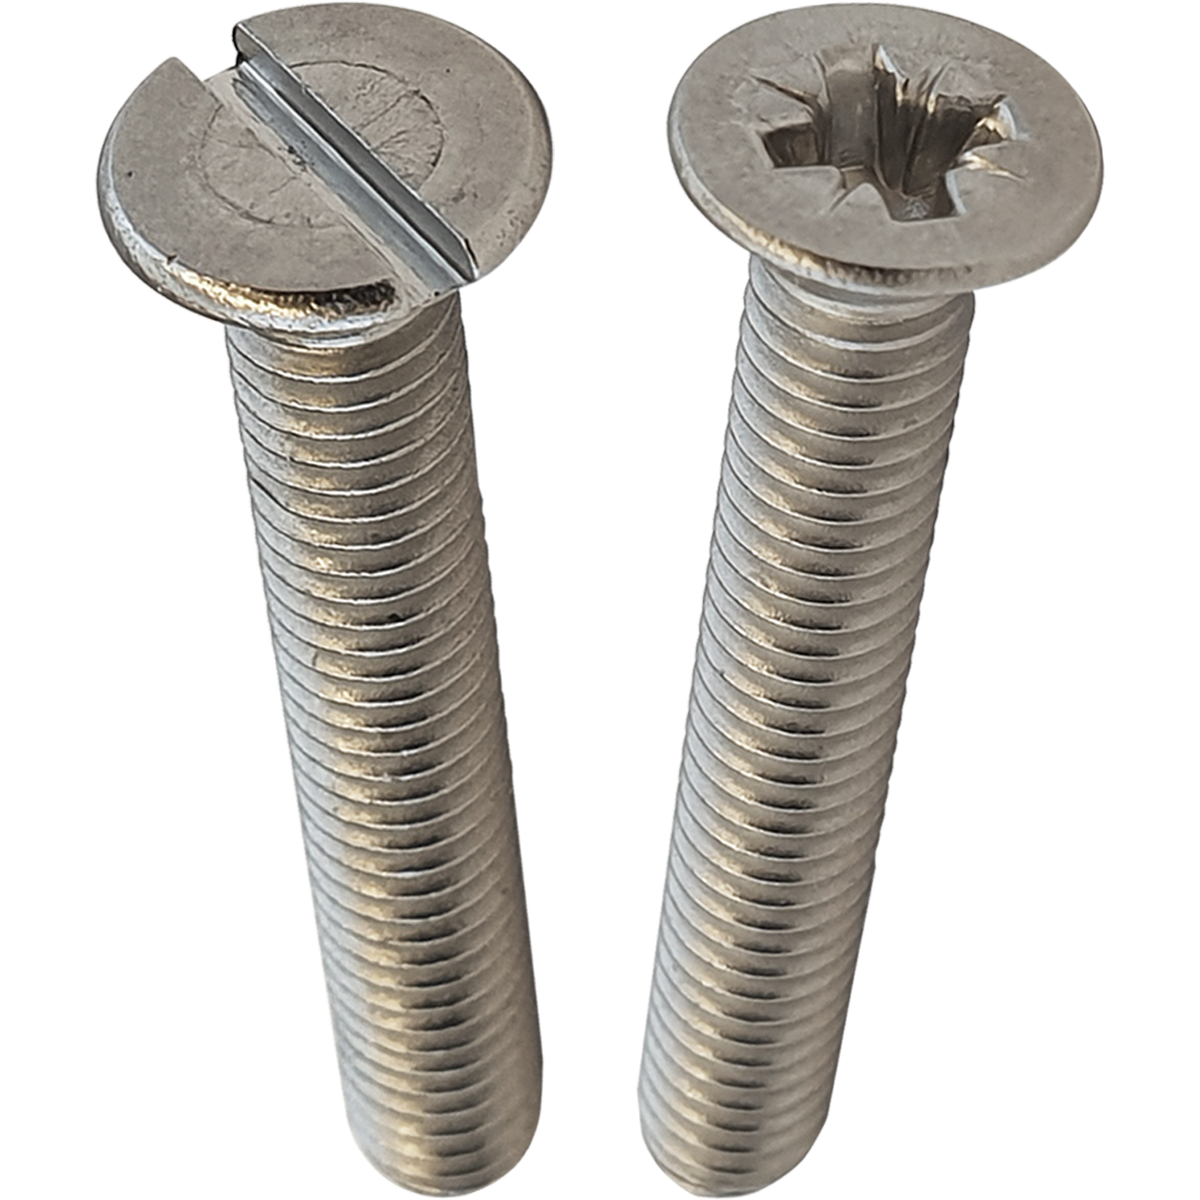 An extensive range of countersunk machine screws are available in a selection of sizes and lengths all at competitive prices